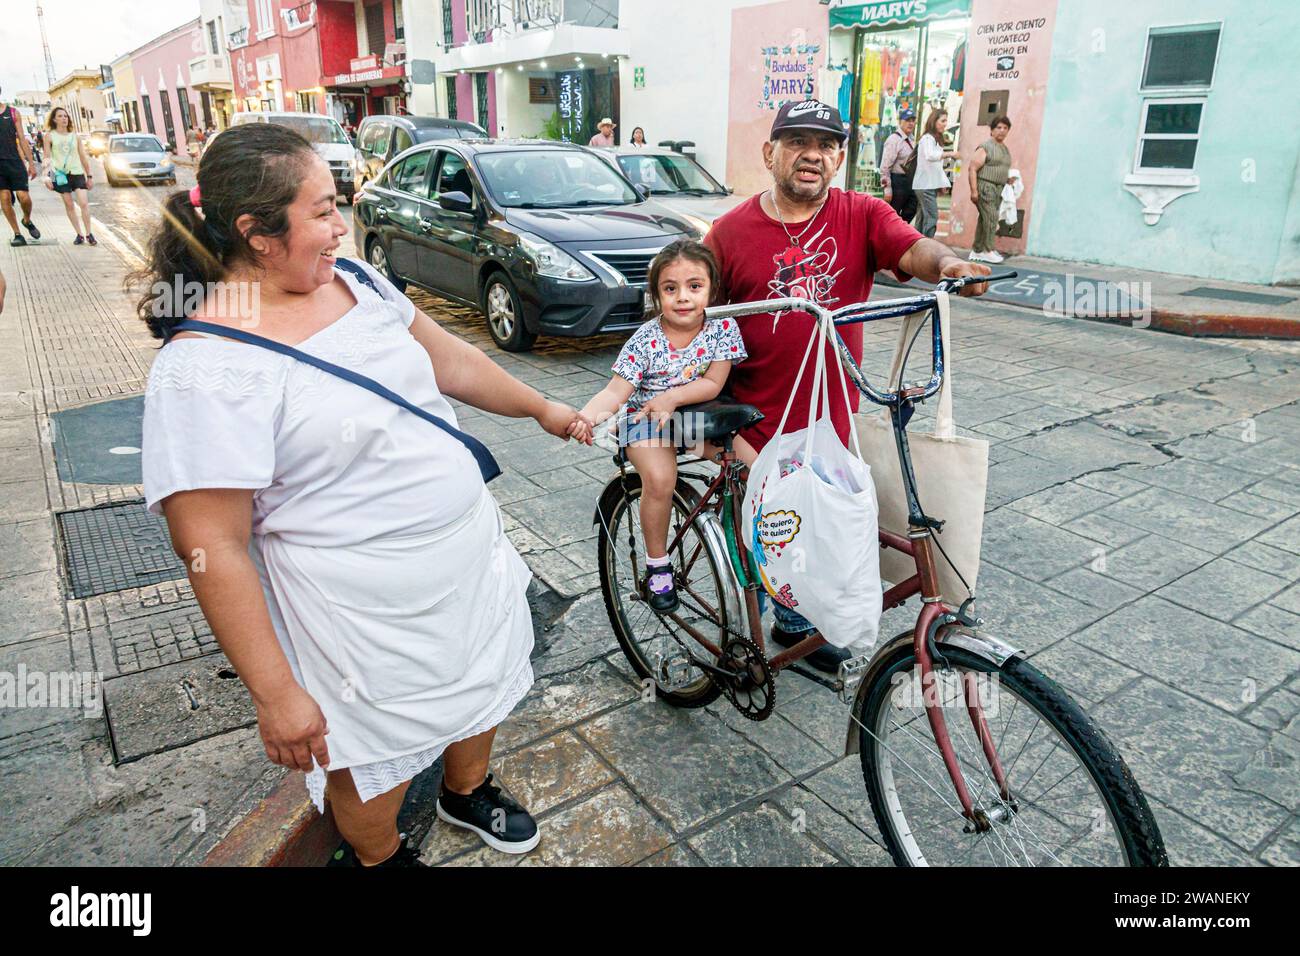 Merida Mexico,centro historico central historic district,bicycle holding hands,man men male,woman women lady female,adults residents couple,family par Stock Photo